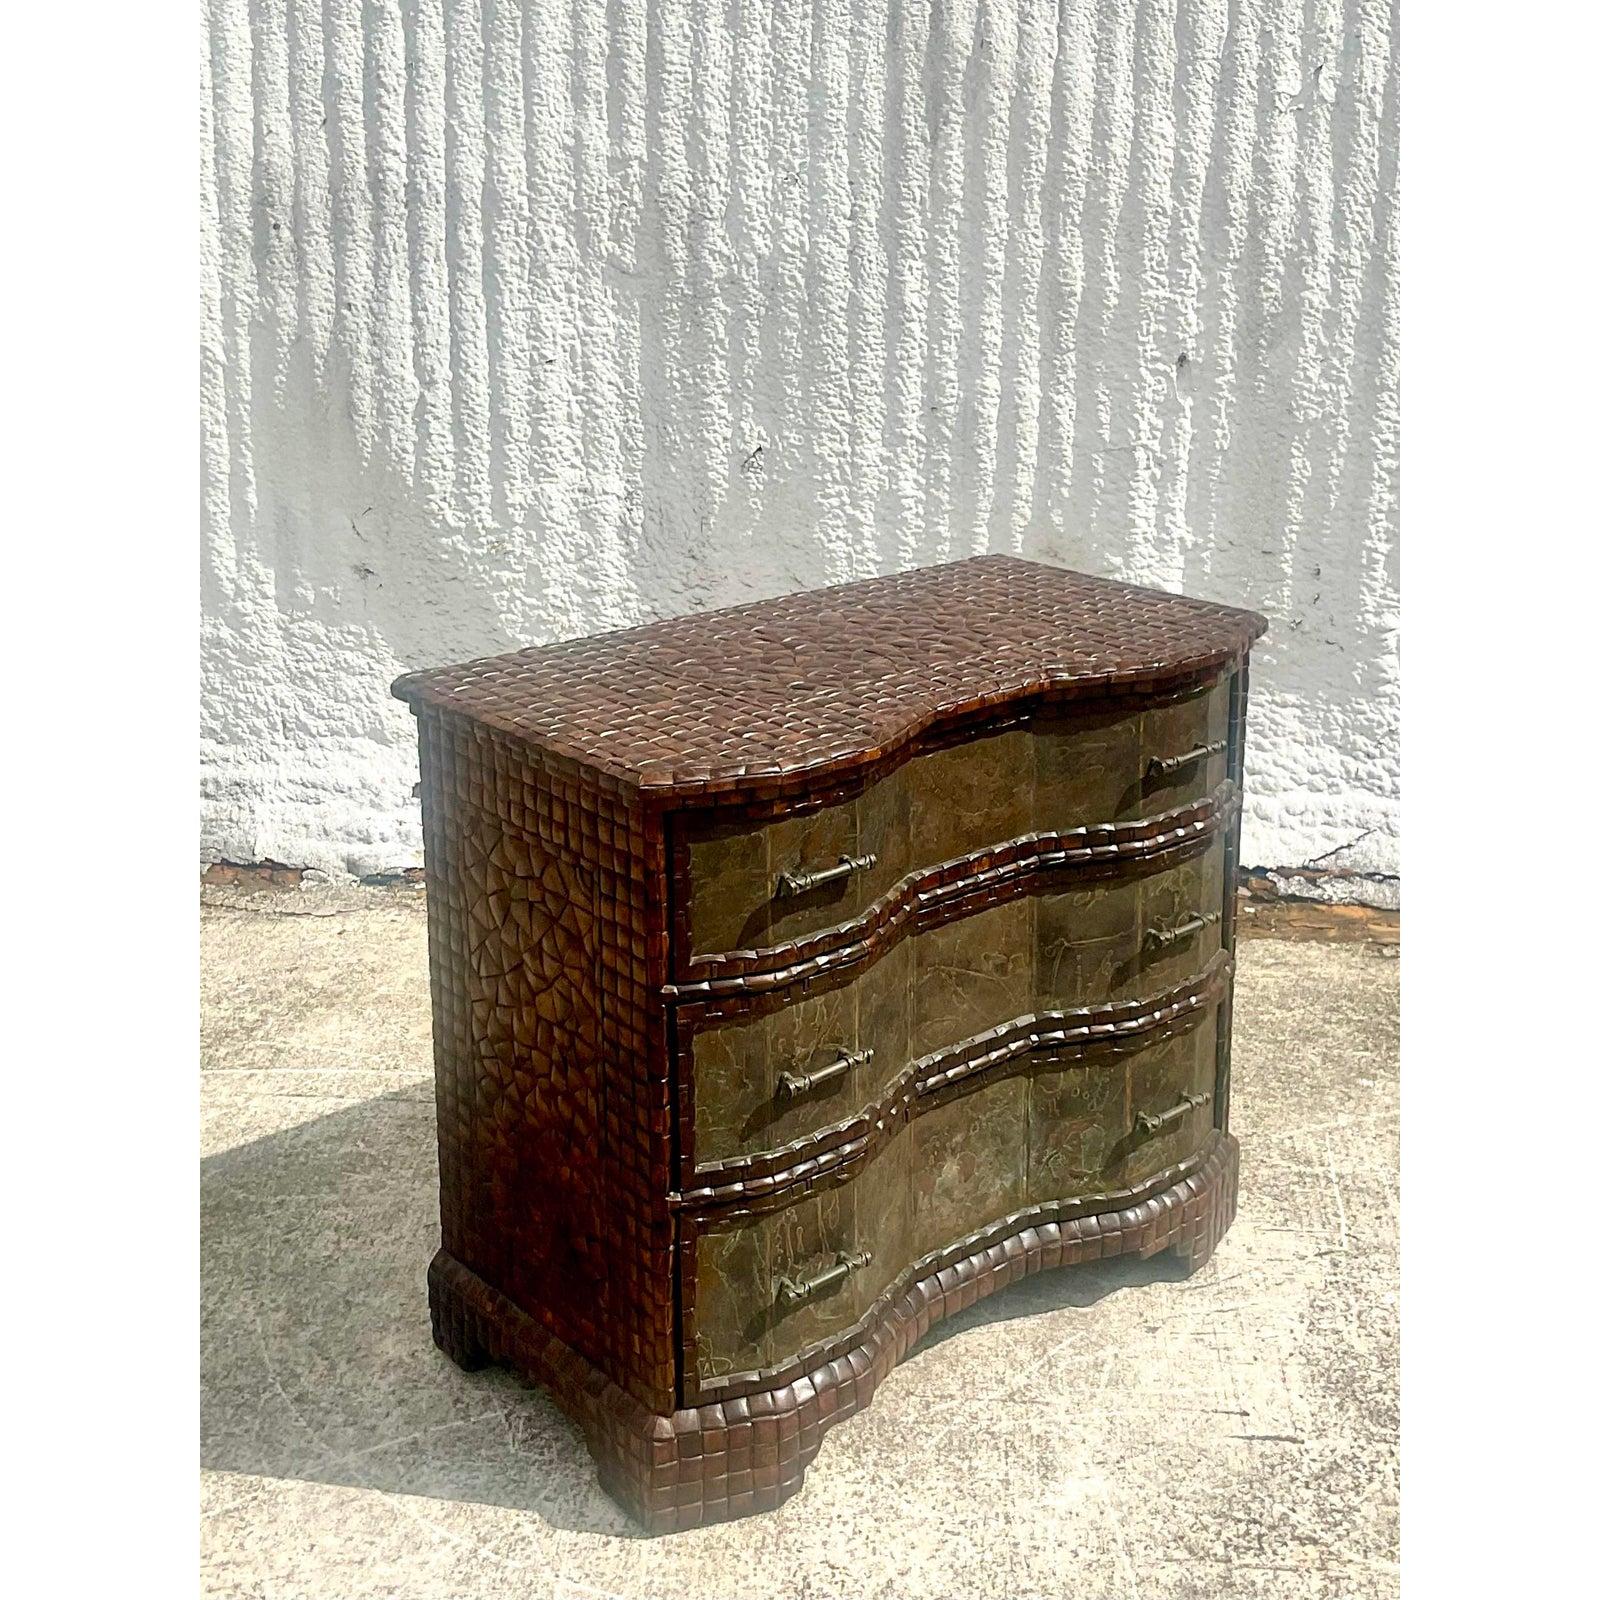 Incredible vintage Maitland-Smith coconut shell cabinet. Beautiful textured verdigris surface with a chic diamond design on top. Truly a collectors item. Marked in the top drawer. Acquired from a Palm Beach estate.